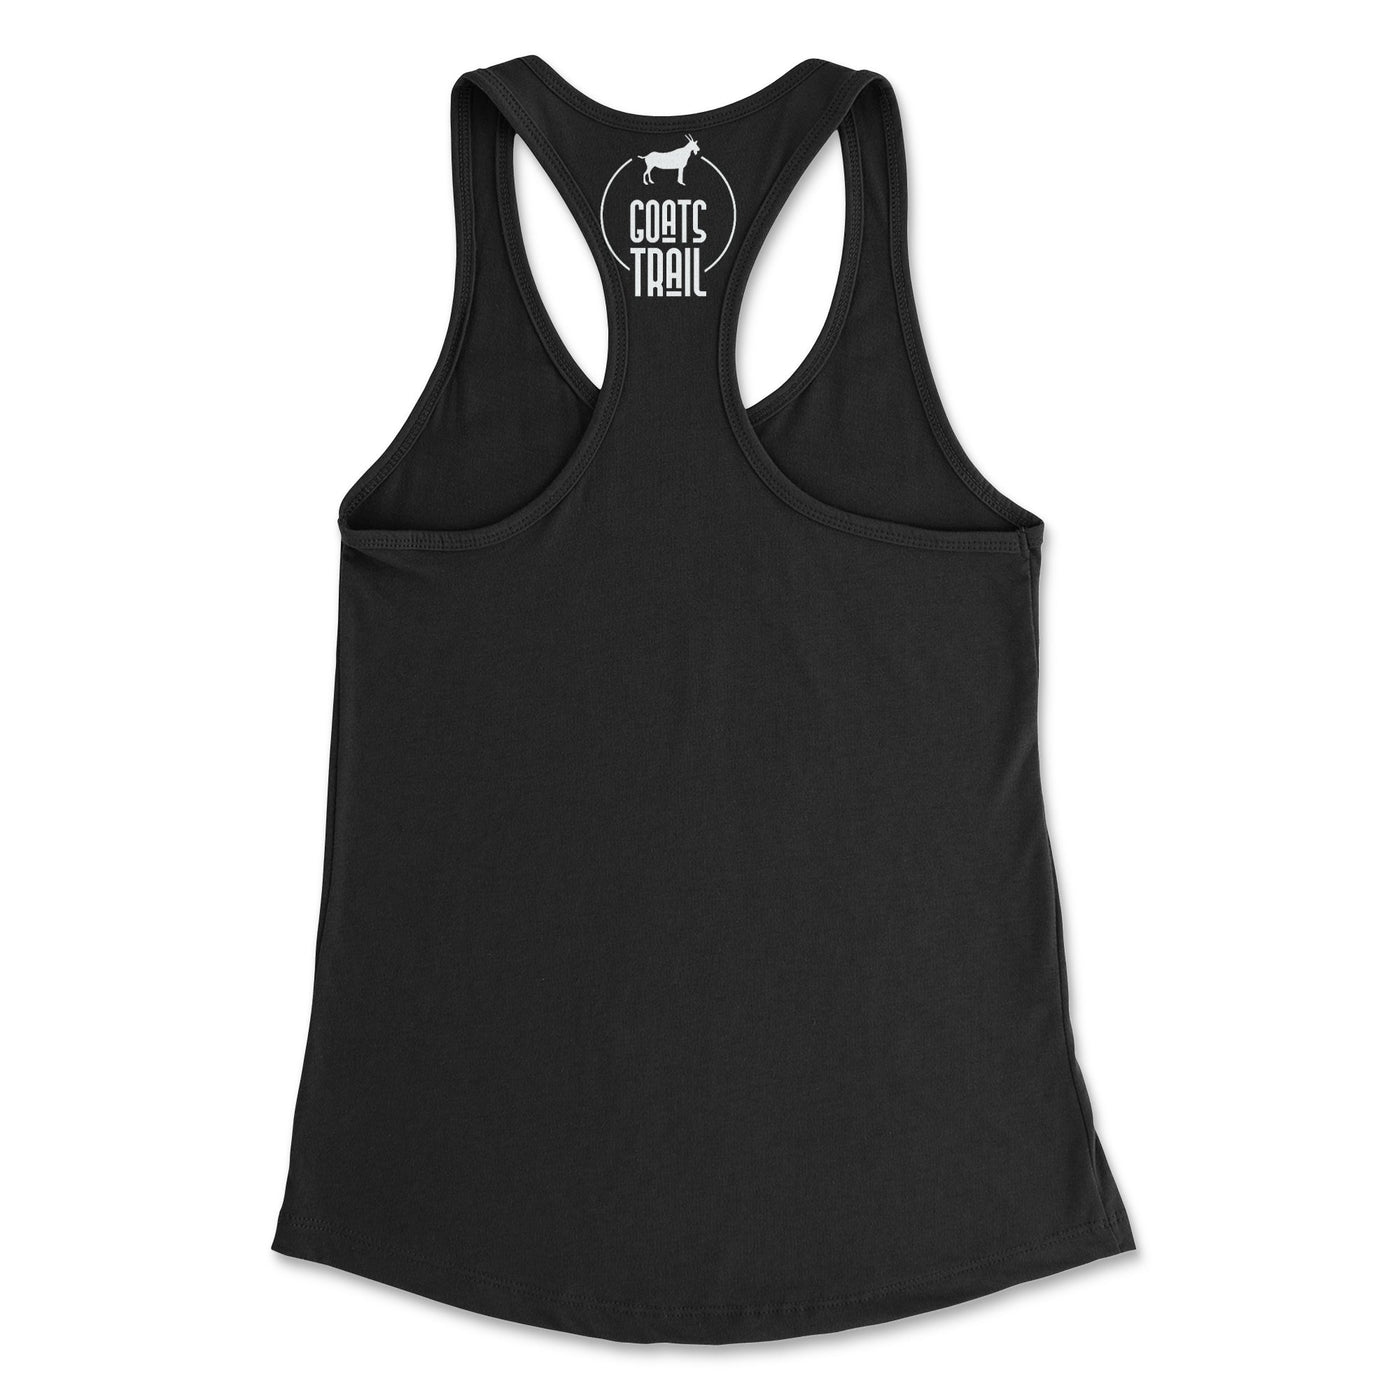 Women's Adventure Offroad-The Airdown Club Tank Top - Goats Trail Off-Road Apparel Company